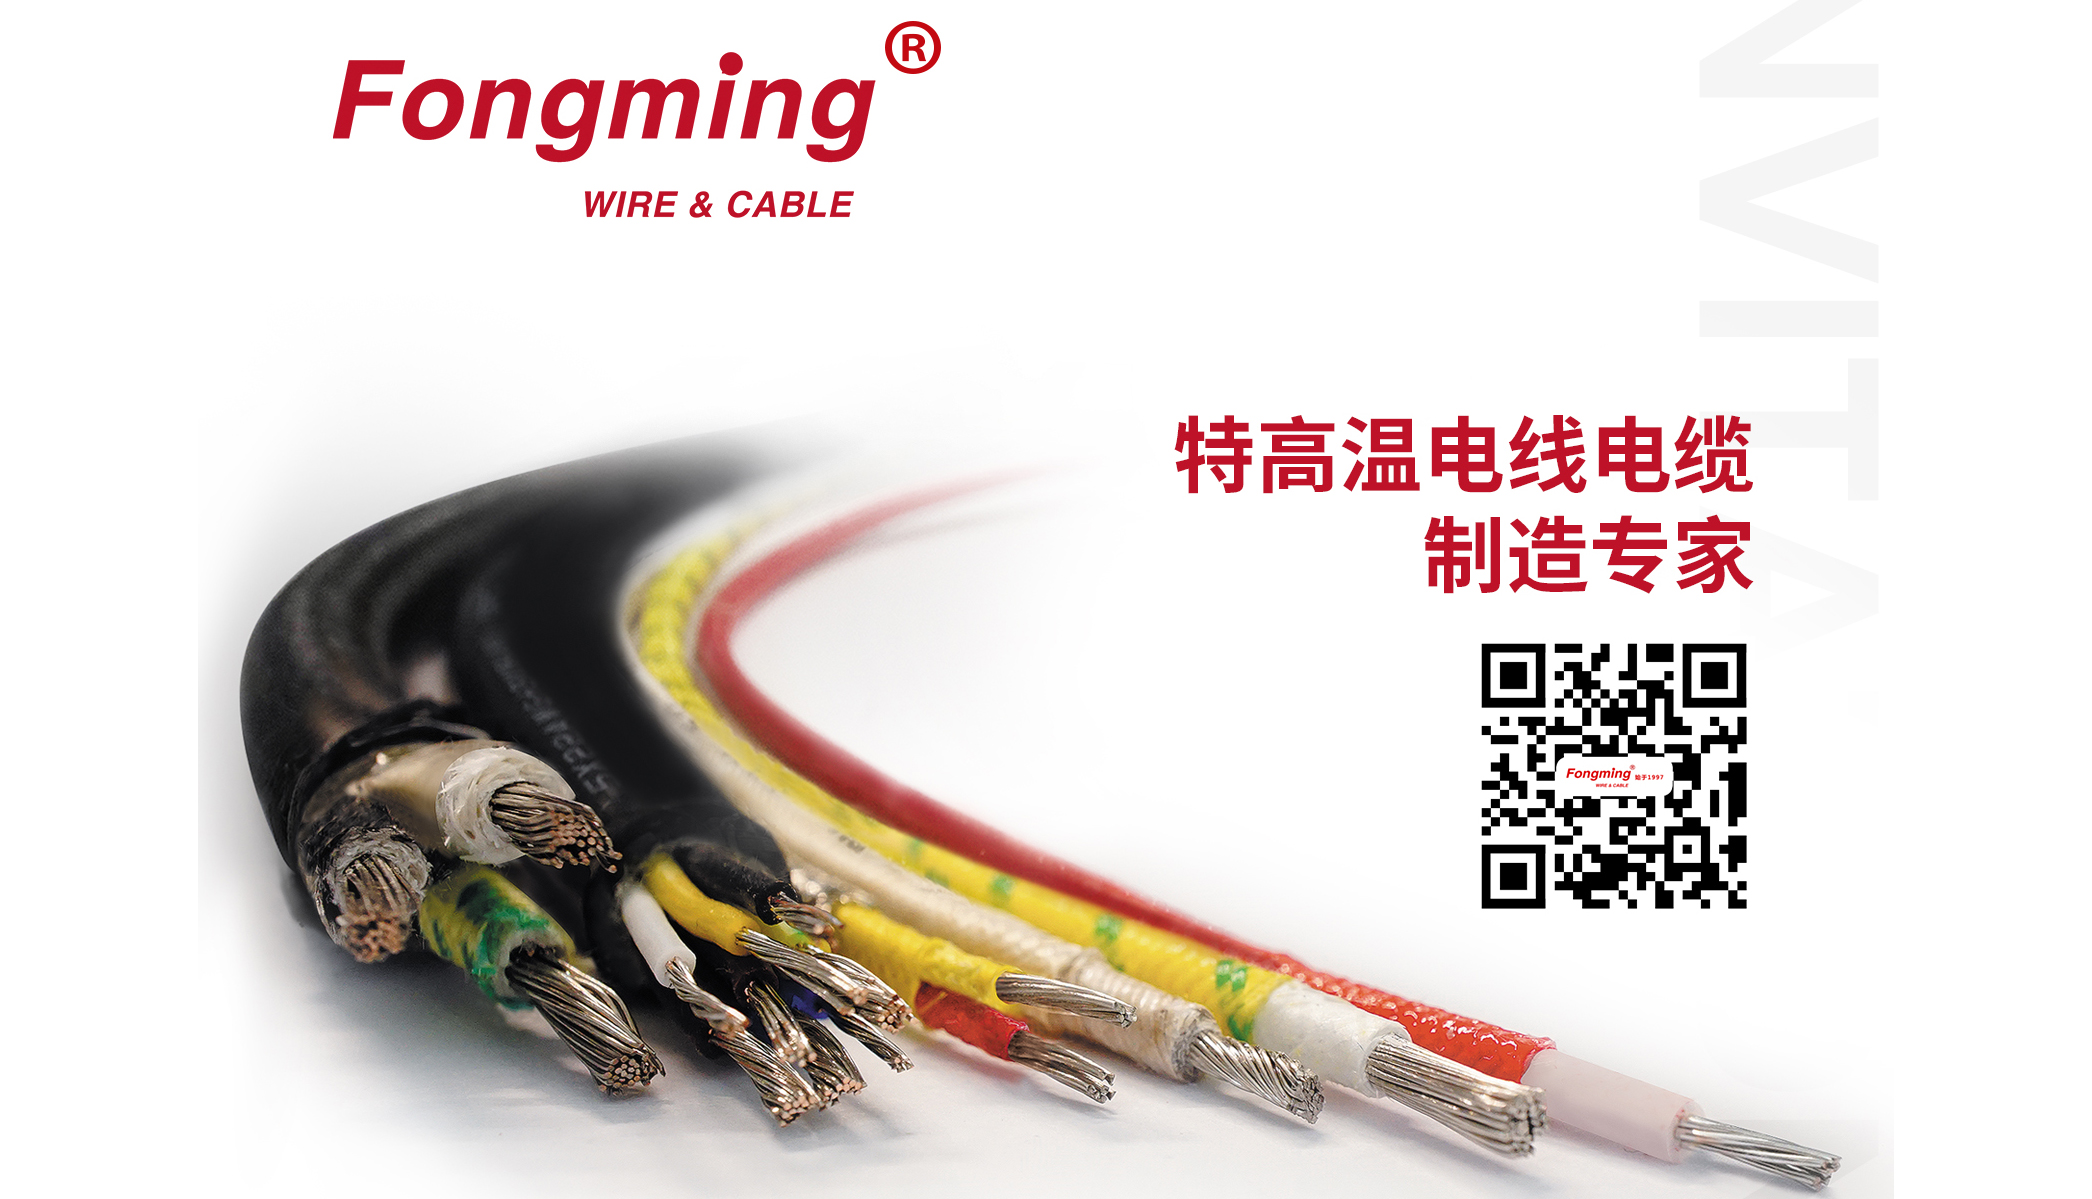 Fongming Cable 丨The countdown to the Canton Fair is one day, we will see you there!